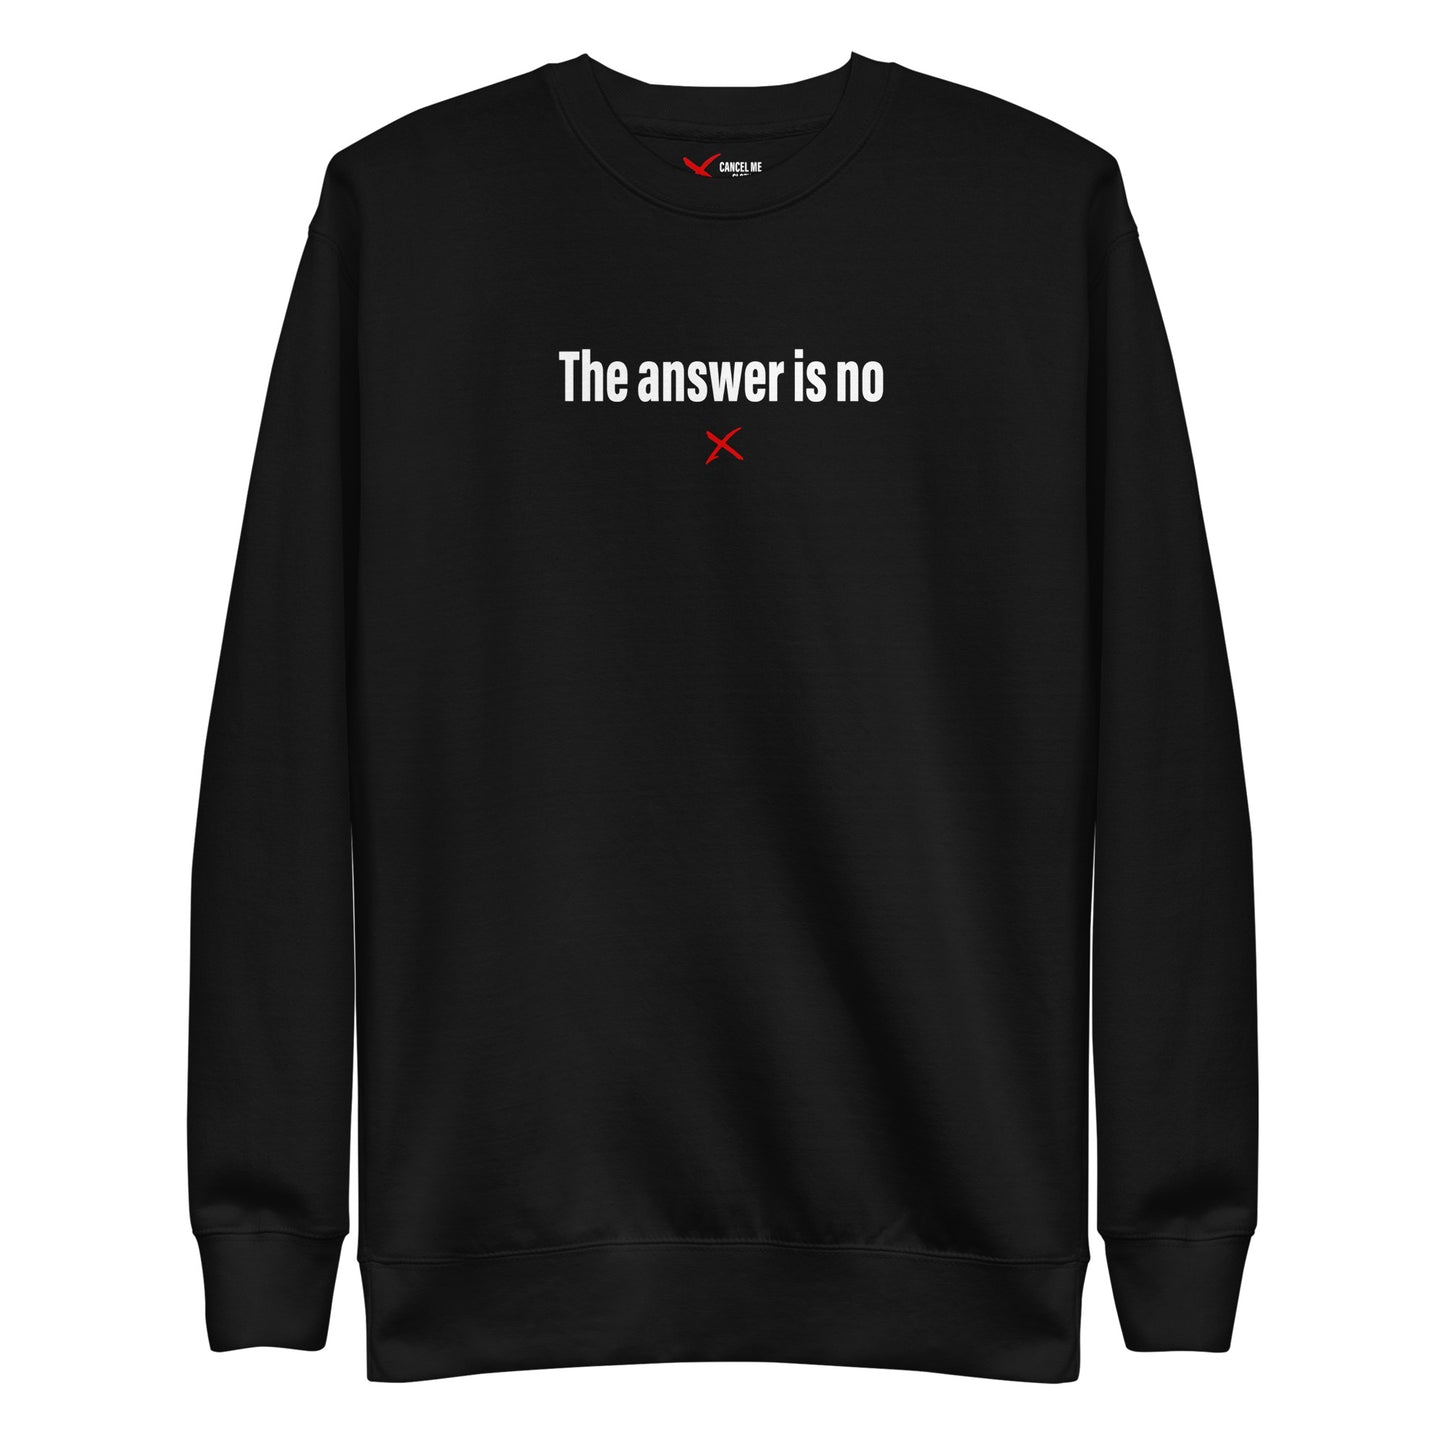 The answer is no - Sweatshirt